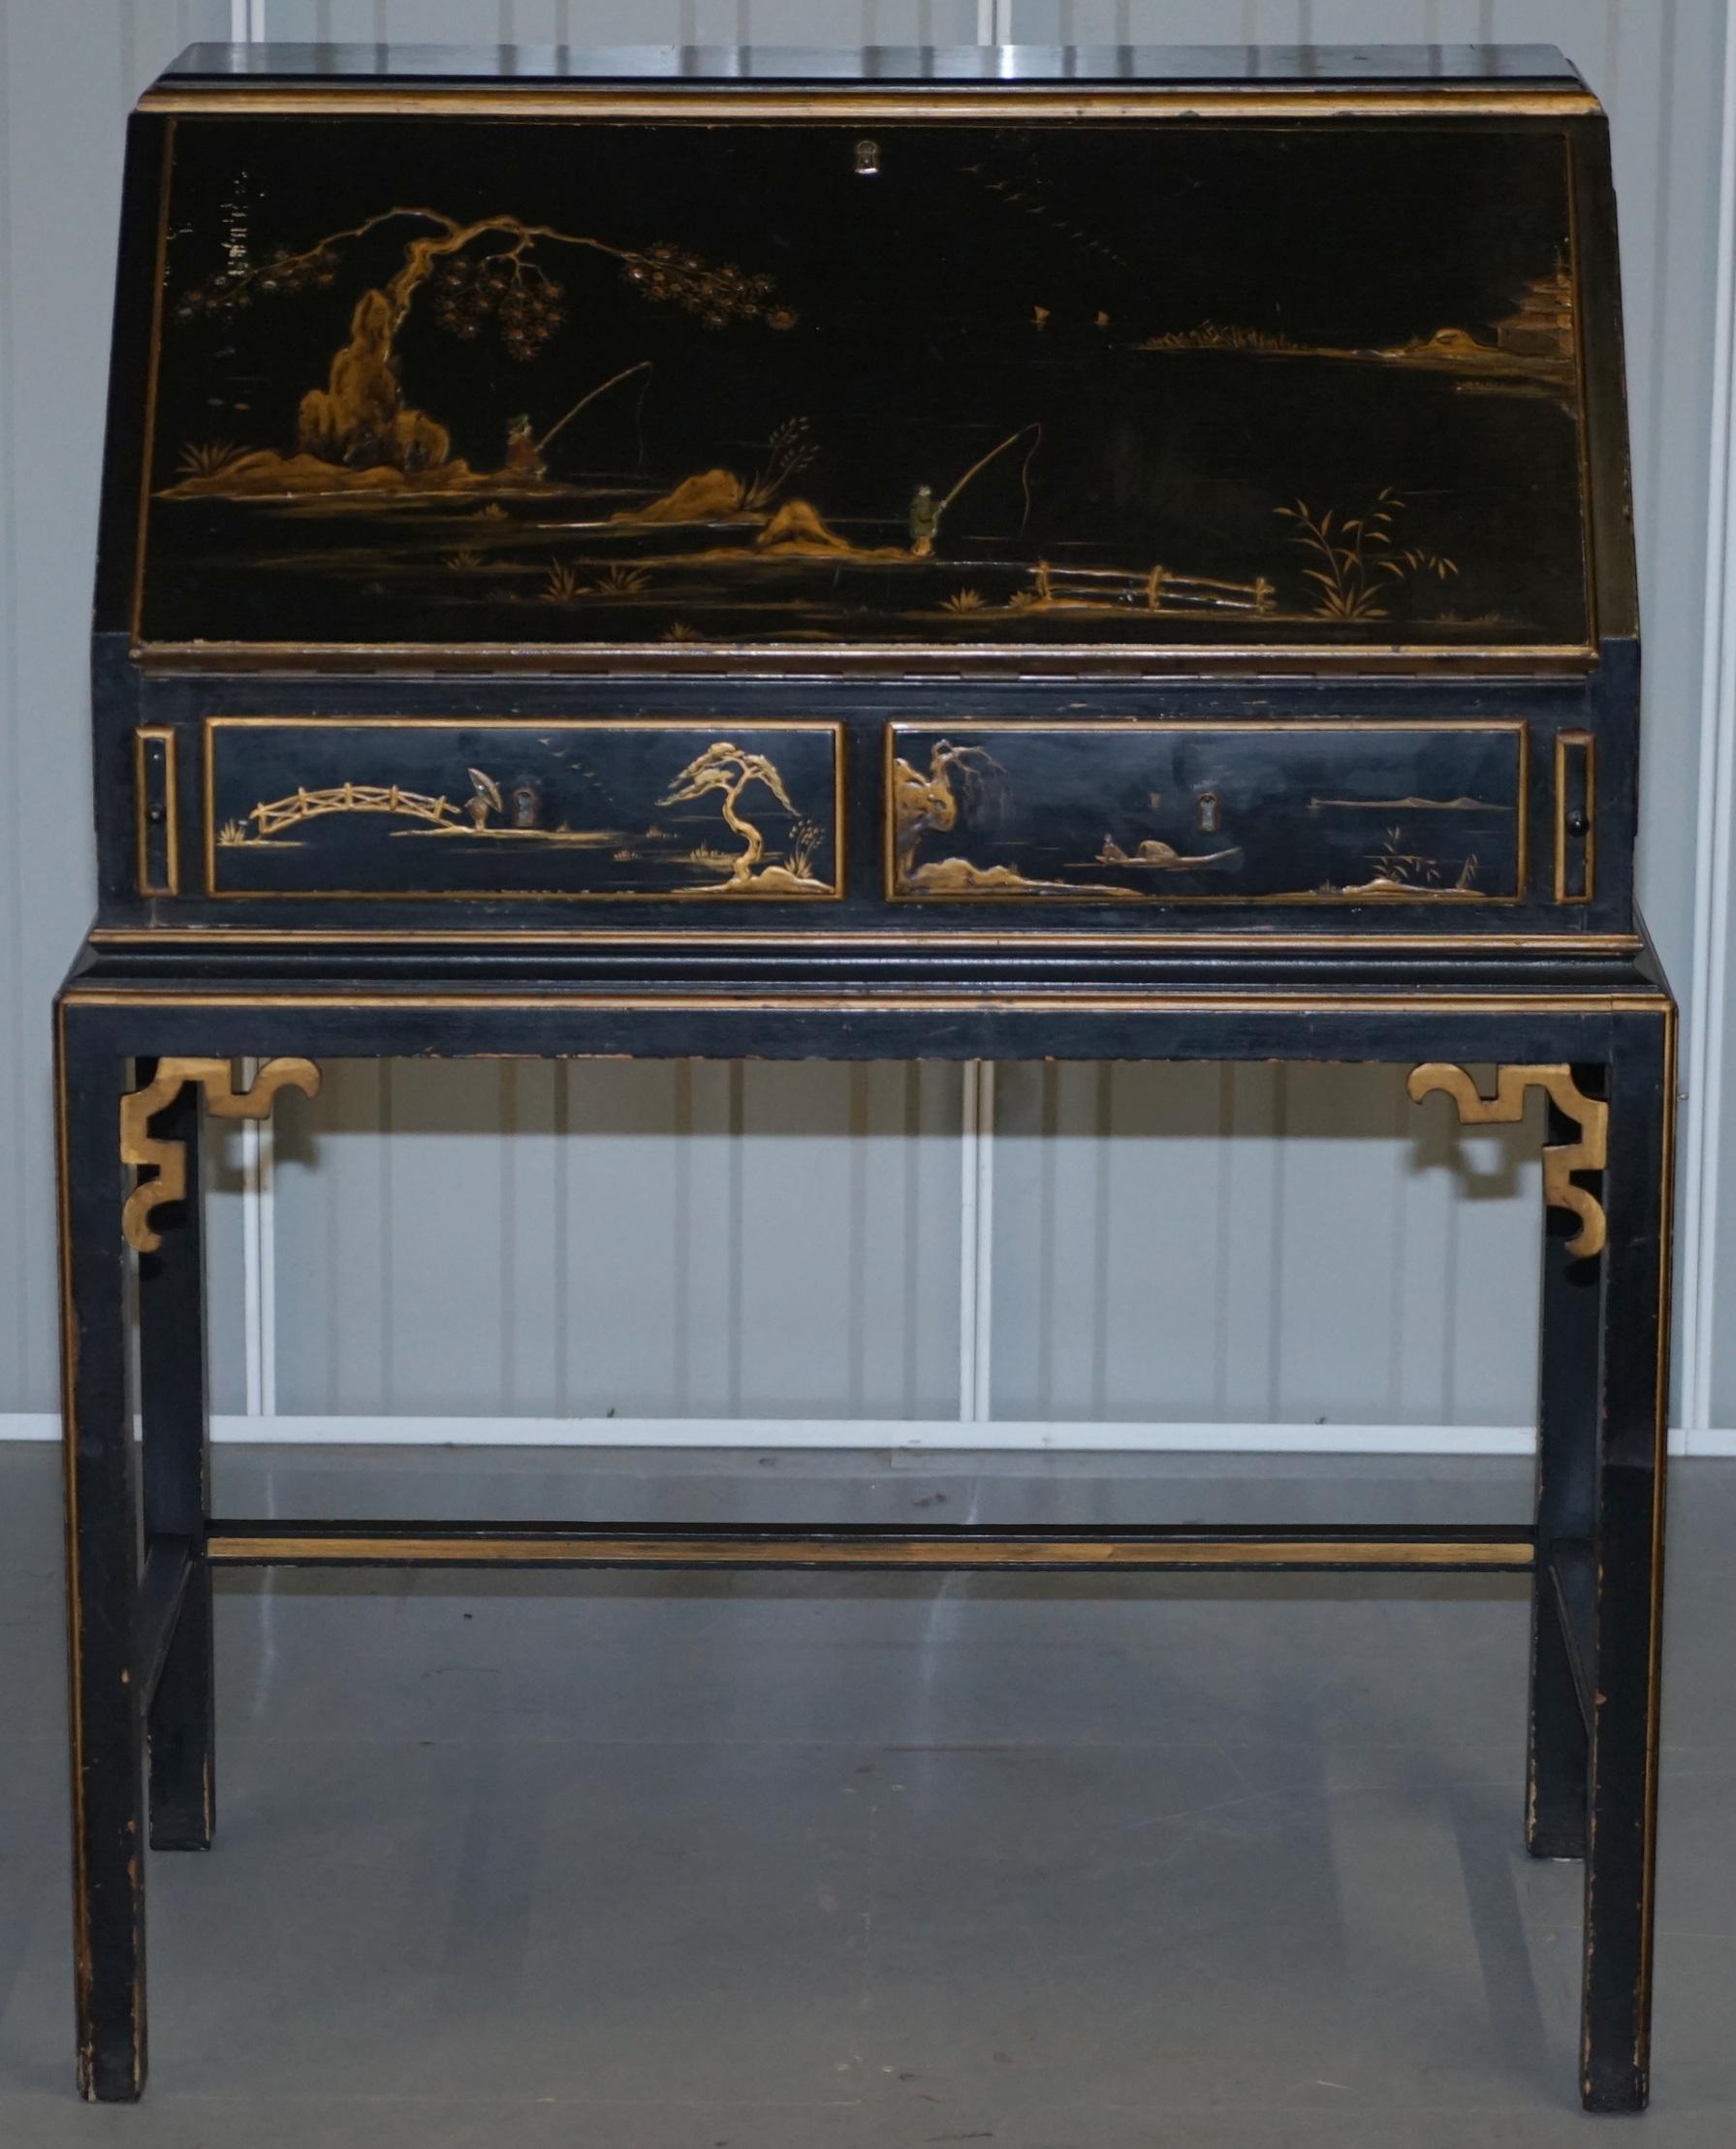 We are delighted to offer for sale this lovely Chinese chinoiserie style writing bureau

A good looking decorative and functional piece of furniture. It really has a good look and feel to it, the frame is all lacquered and has giltwood